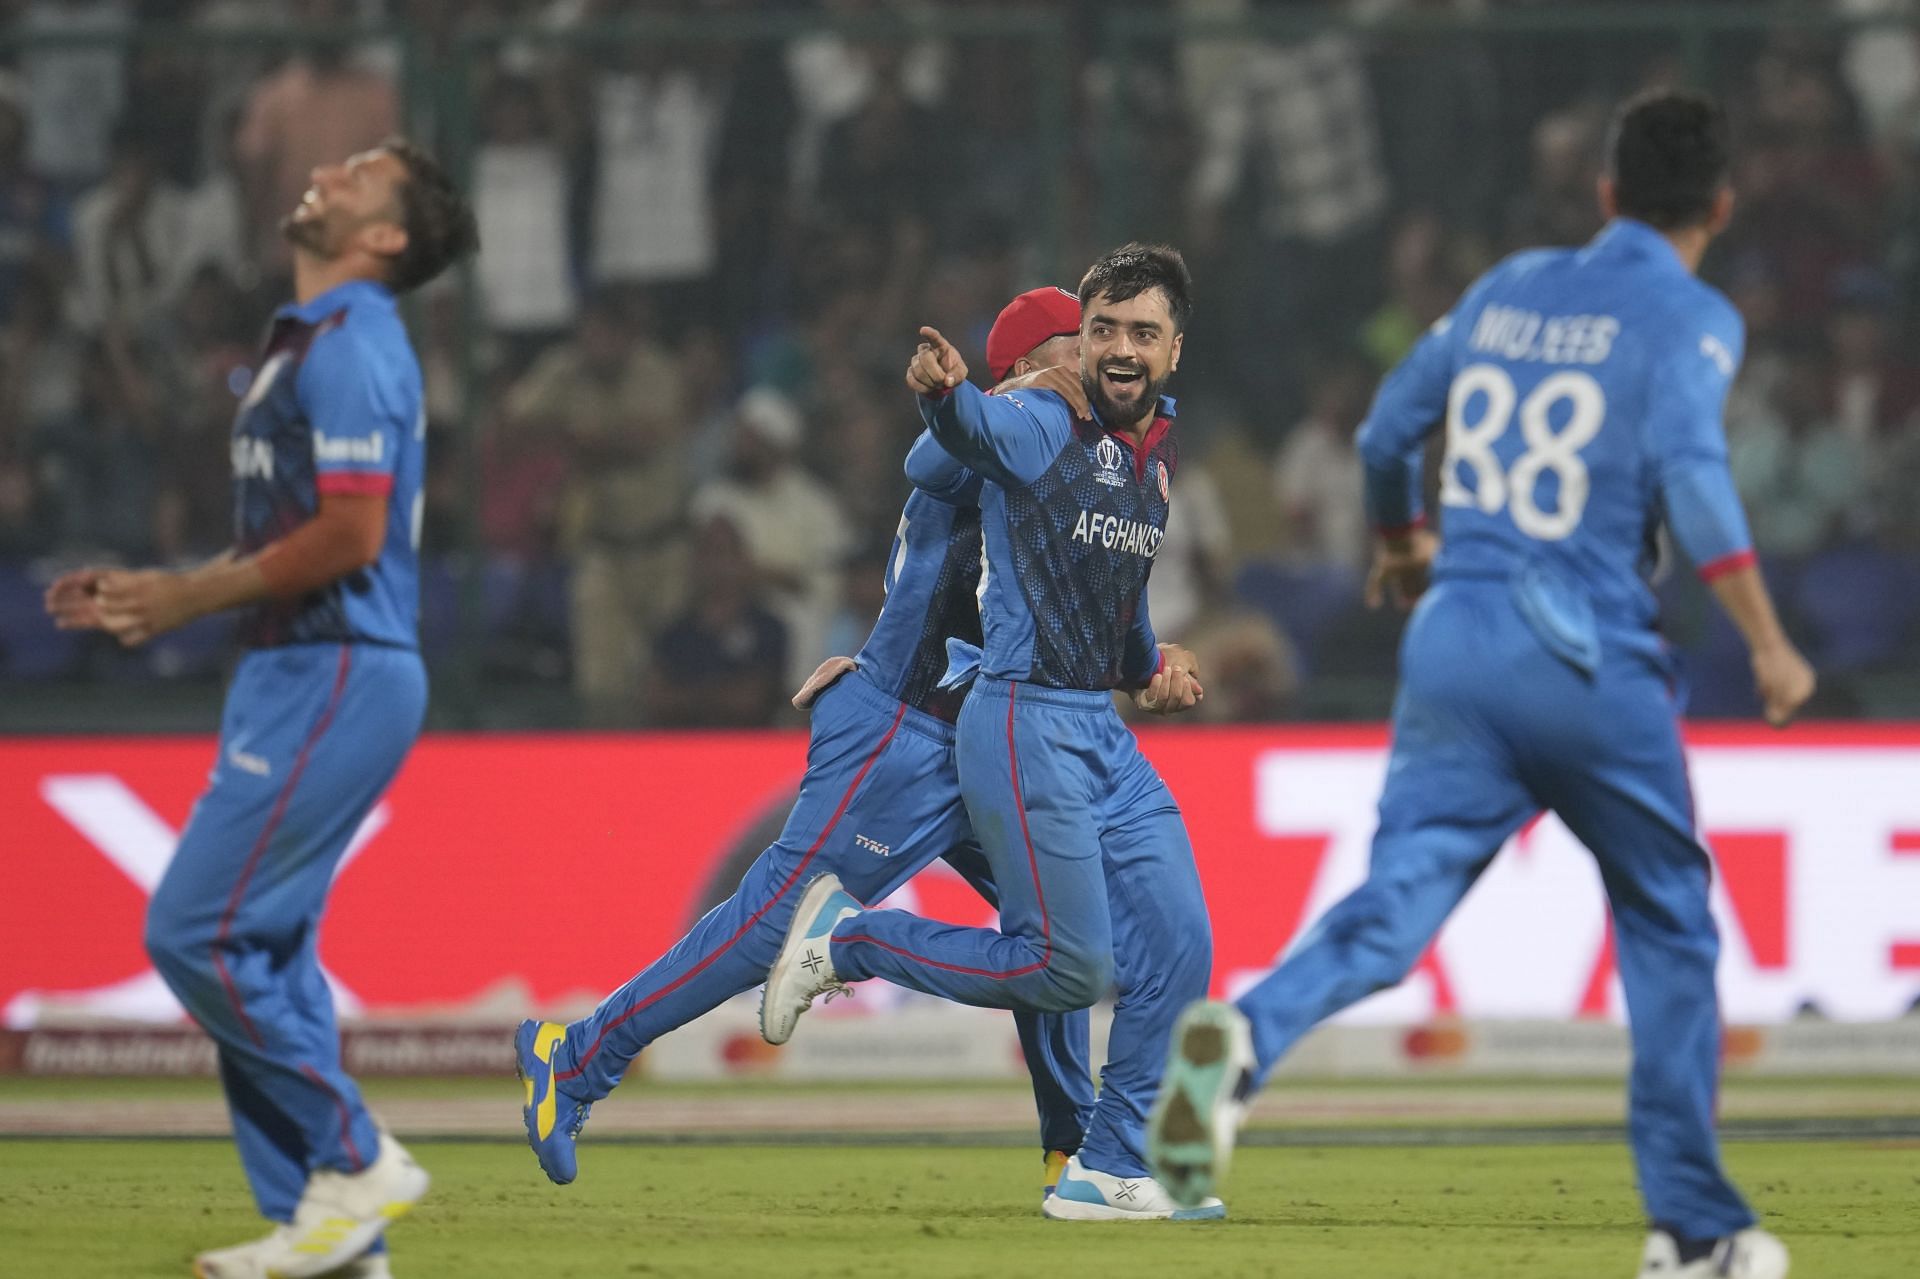 Rashid Khan celebrating with his teammates [Getty Images]